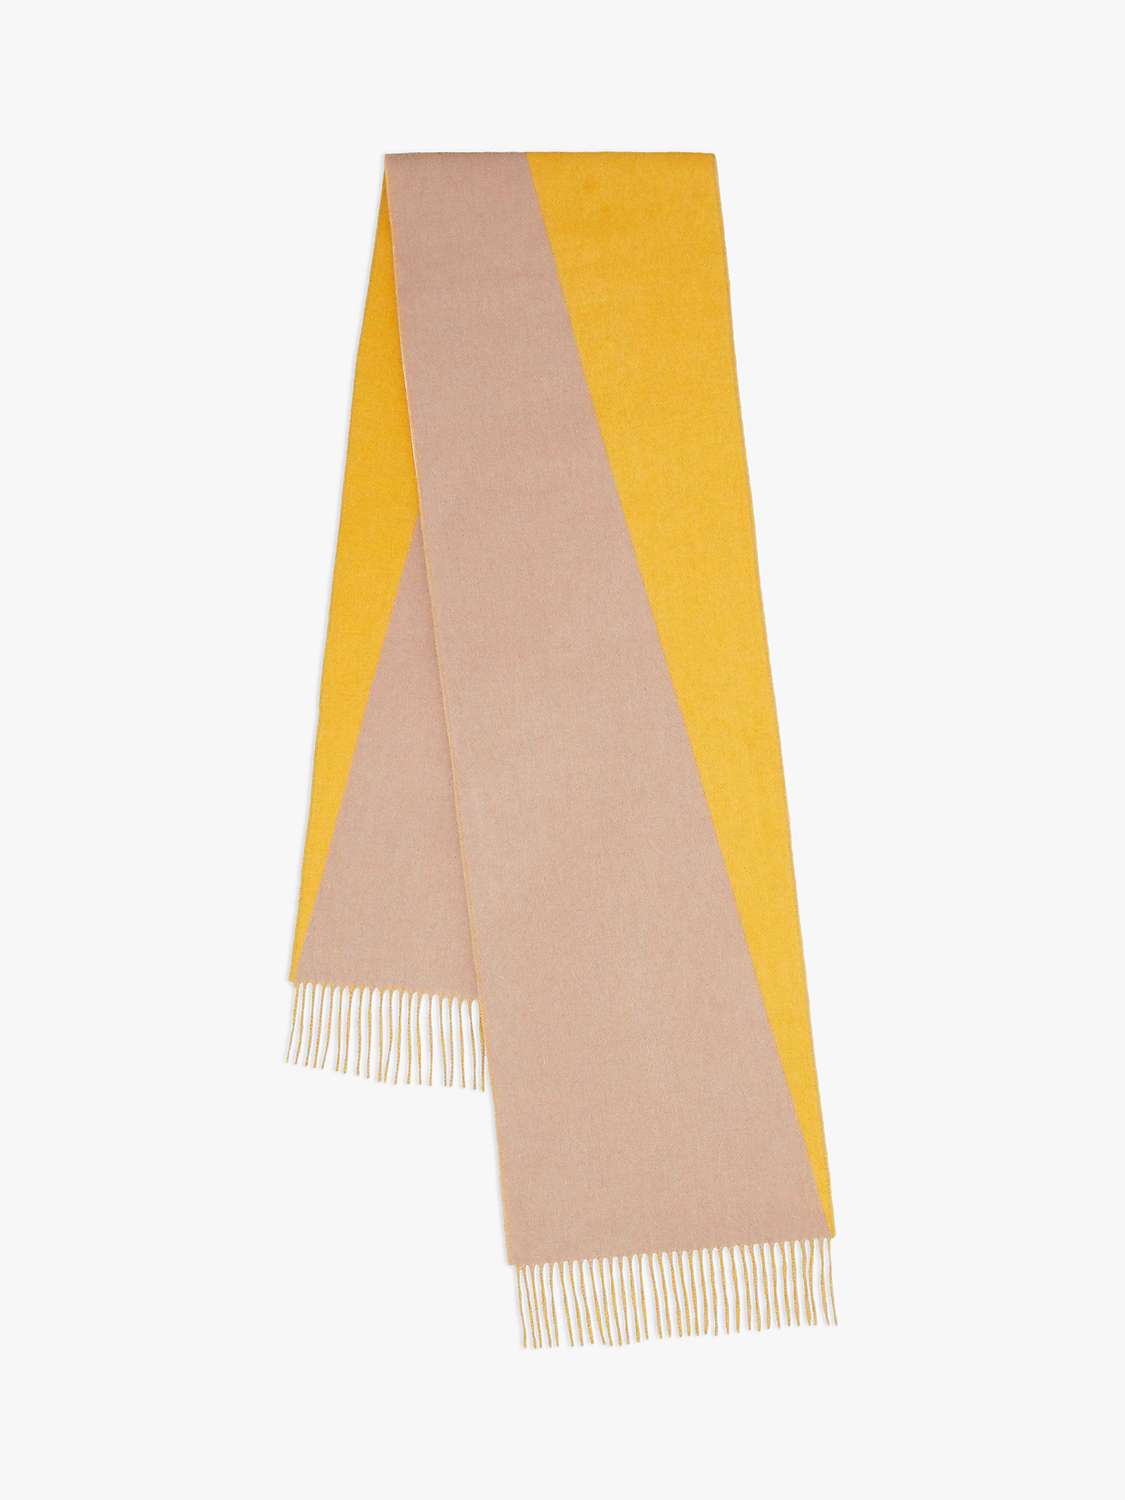 Buy Mulberry Wool Cashmere Two Tone Scarf, Double Yellow/Maple Online at johnlewis.com